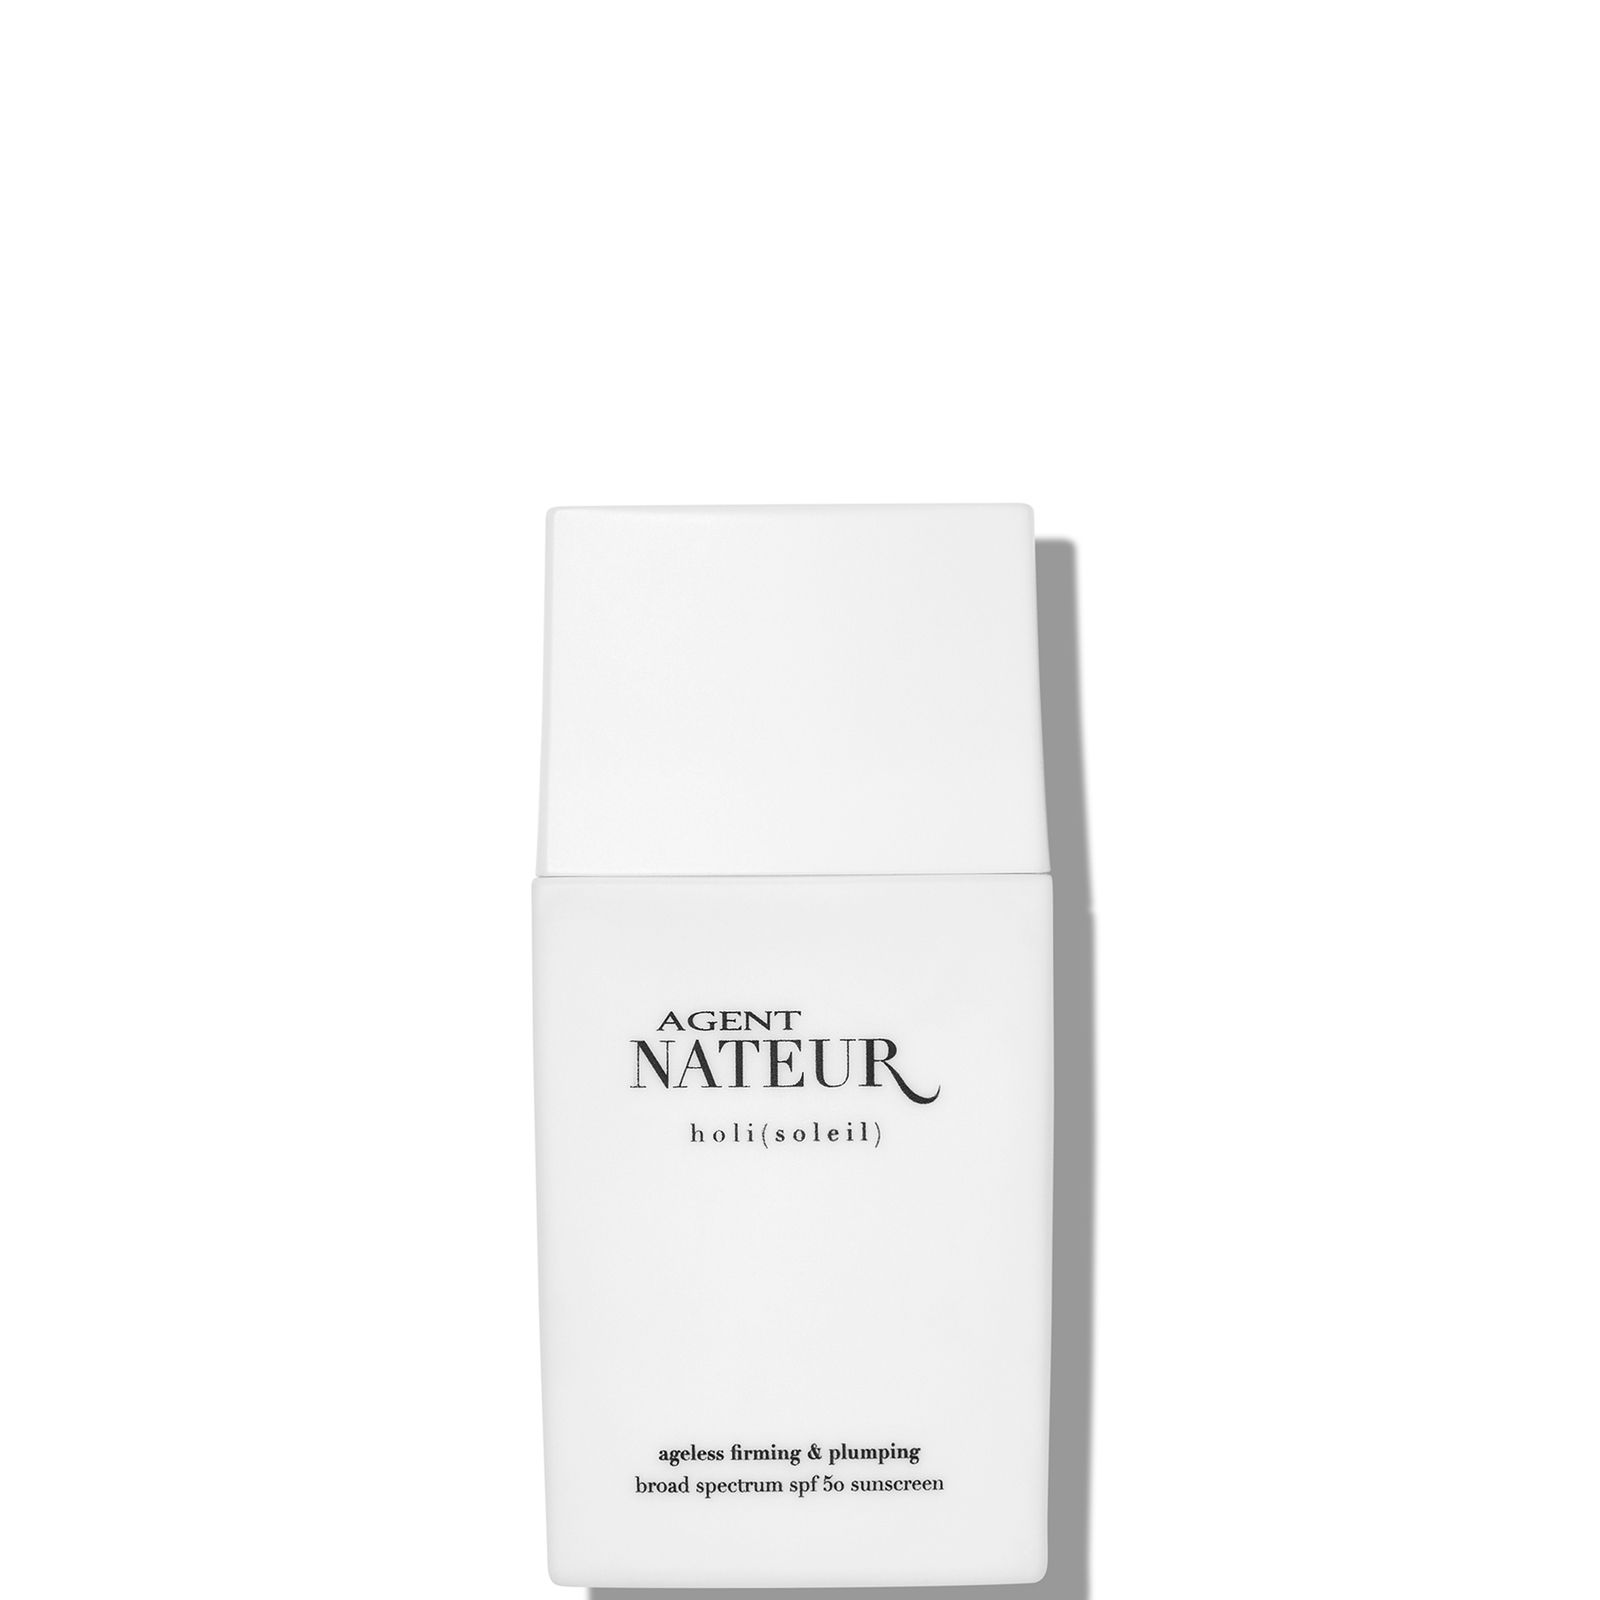 Agent Nateur Holi (soleil) Ageless Firming And Plumping Spf50 30ml In White